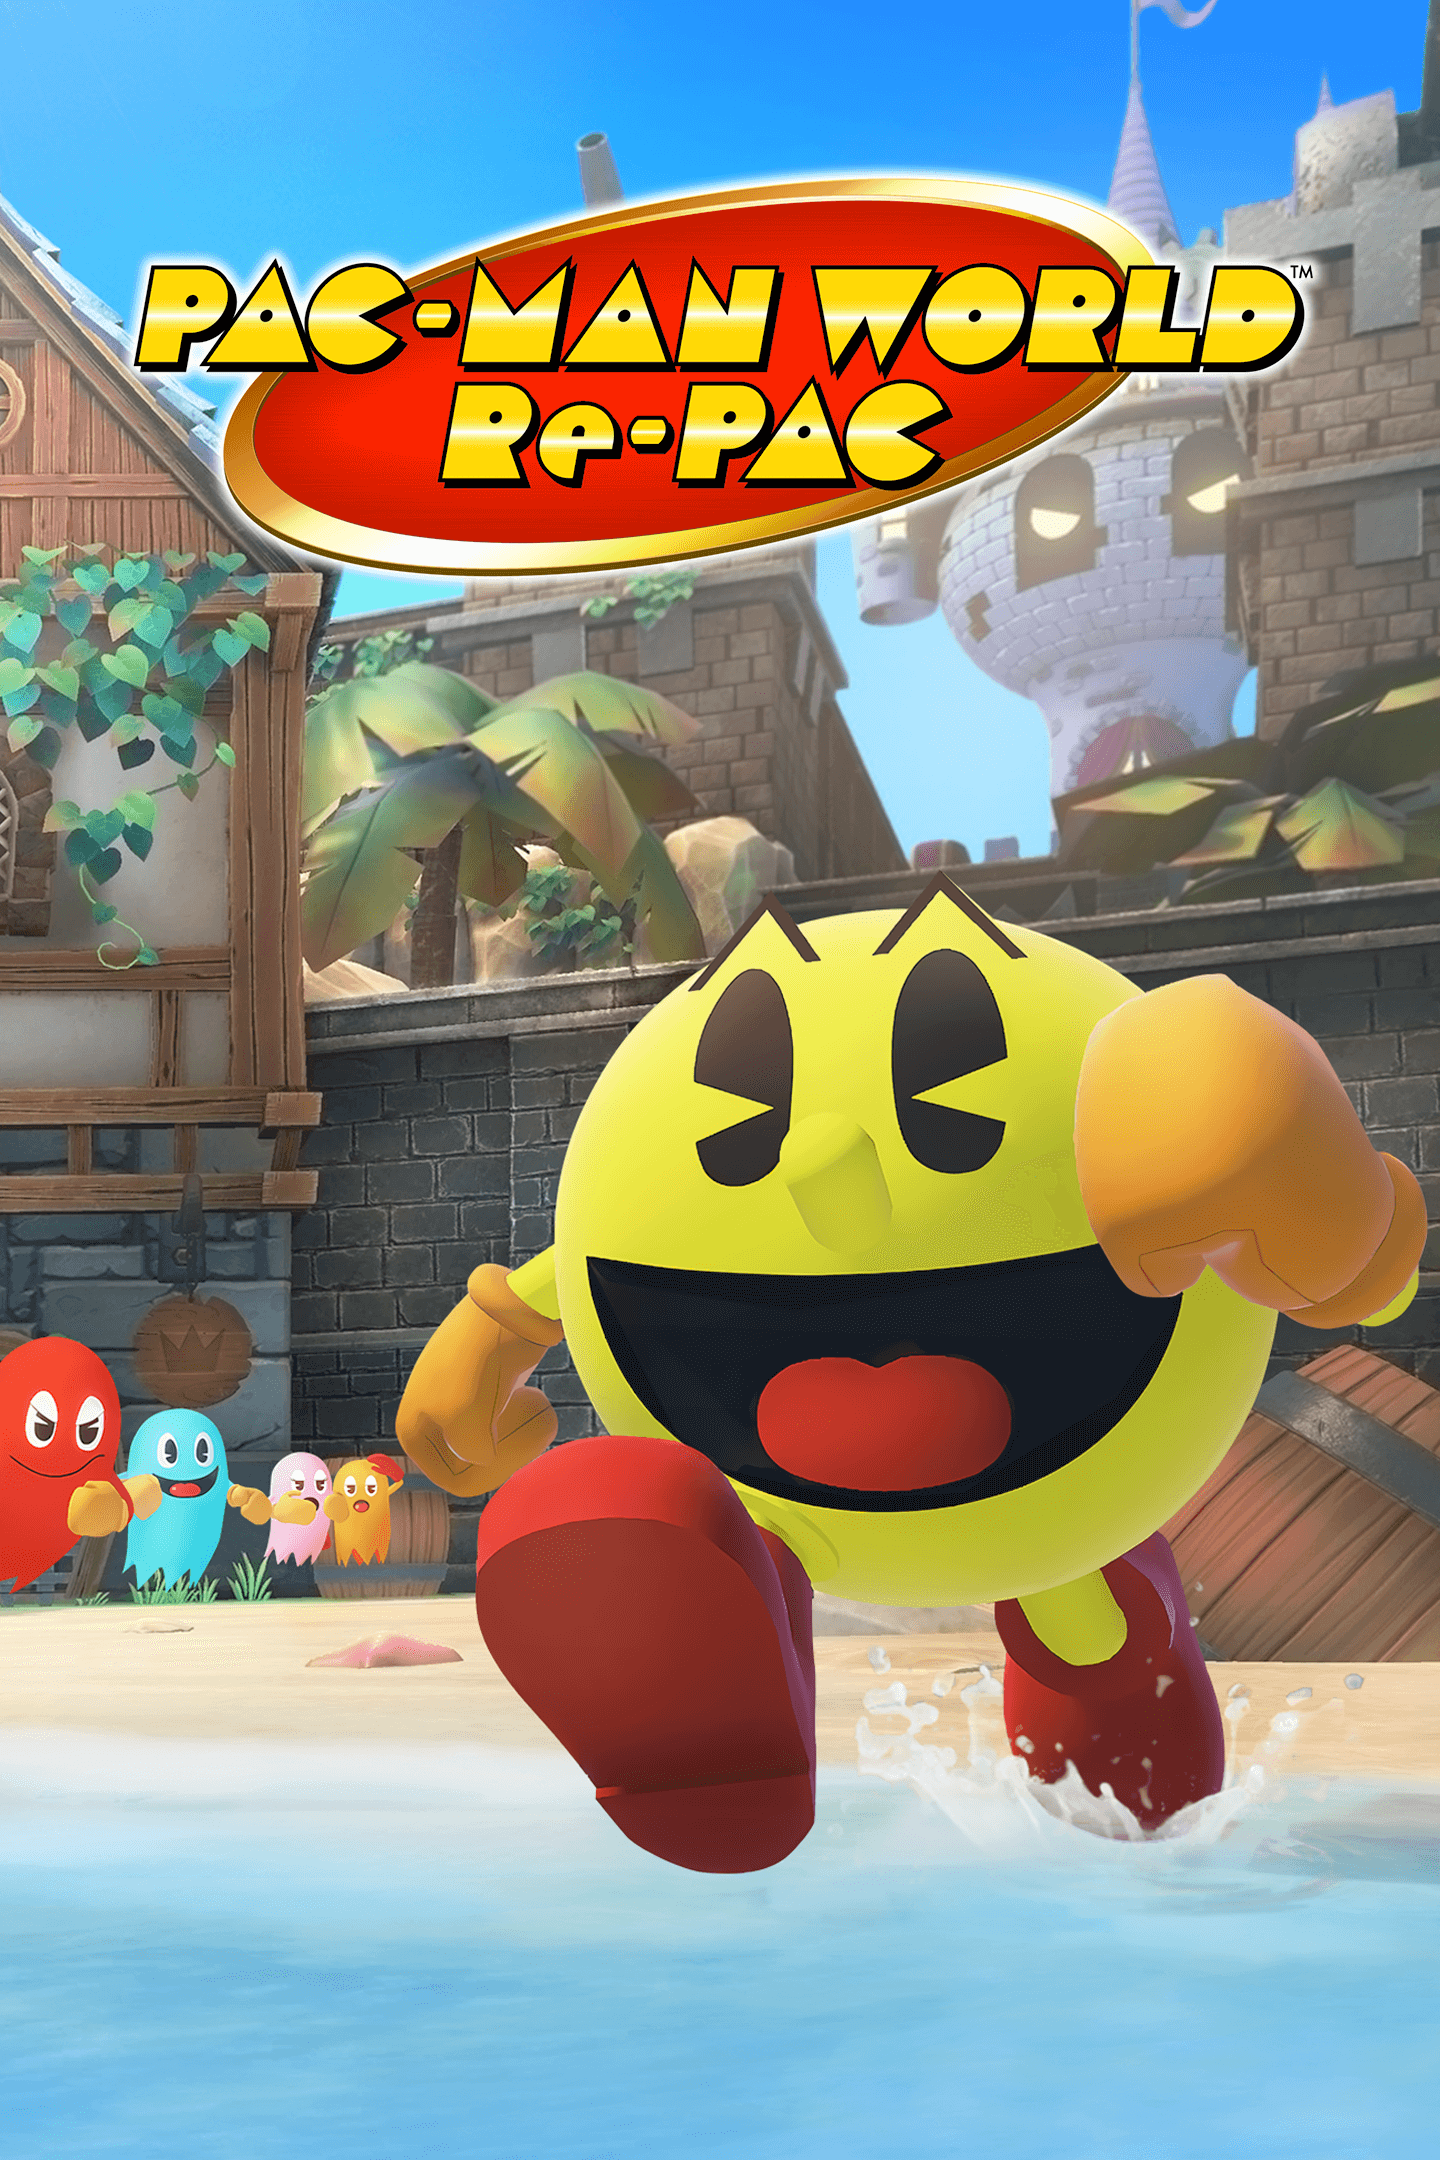 PAC-MAN WORLD Re-PAC Product Image